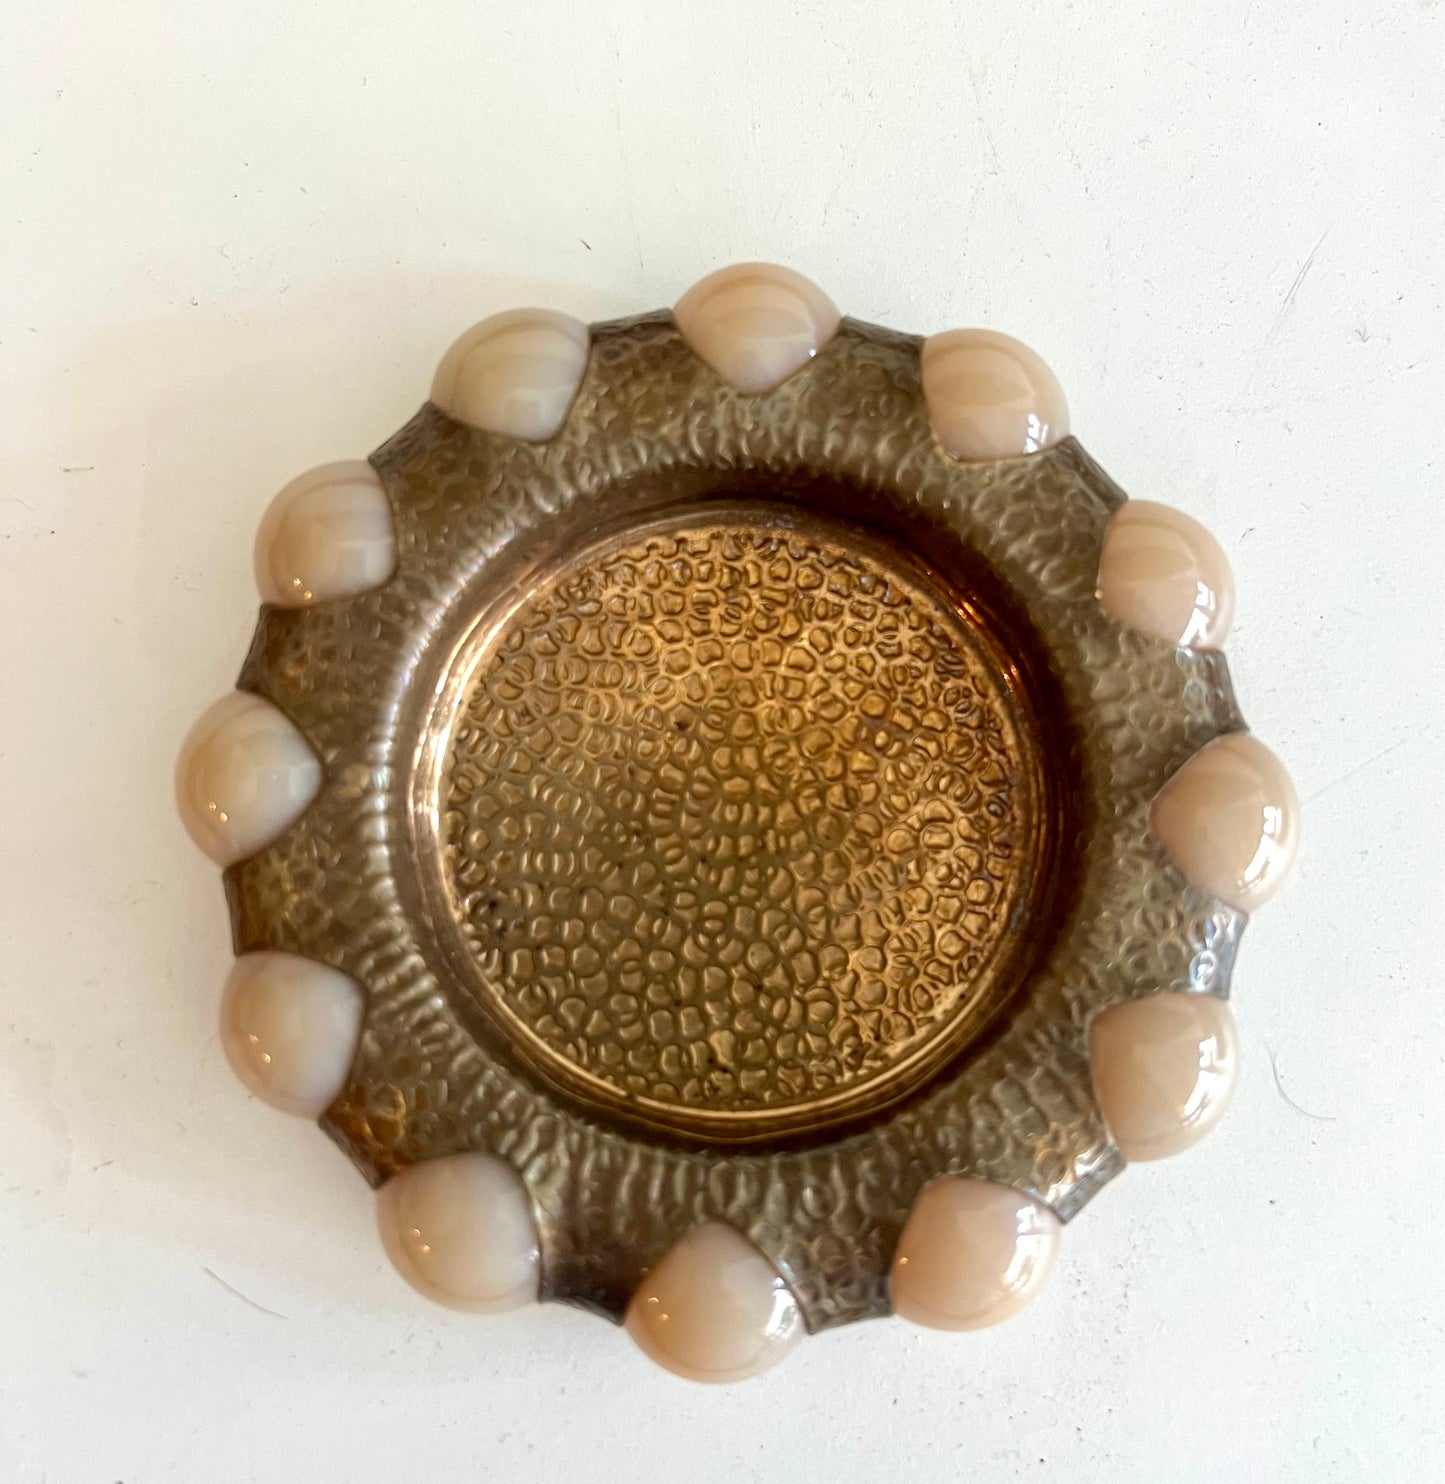 Vintage brass and cream colored beaded jewelry and trinket tray